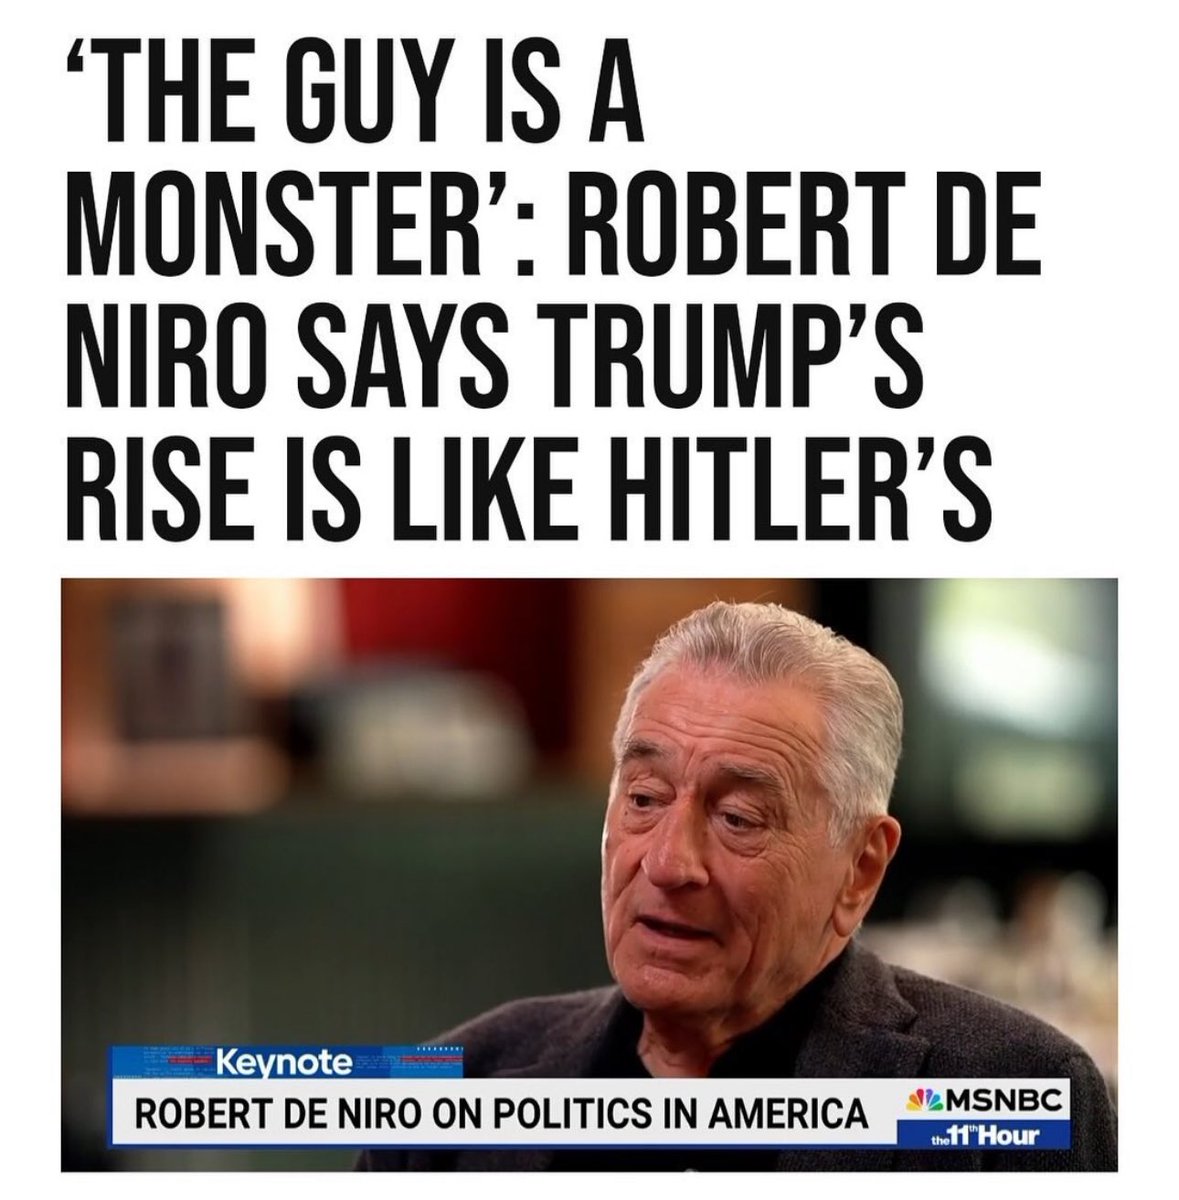 This Robert DeNiro guy is a piece of shit